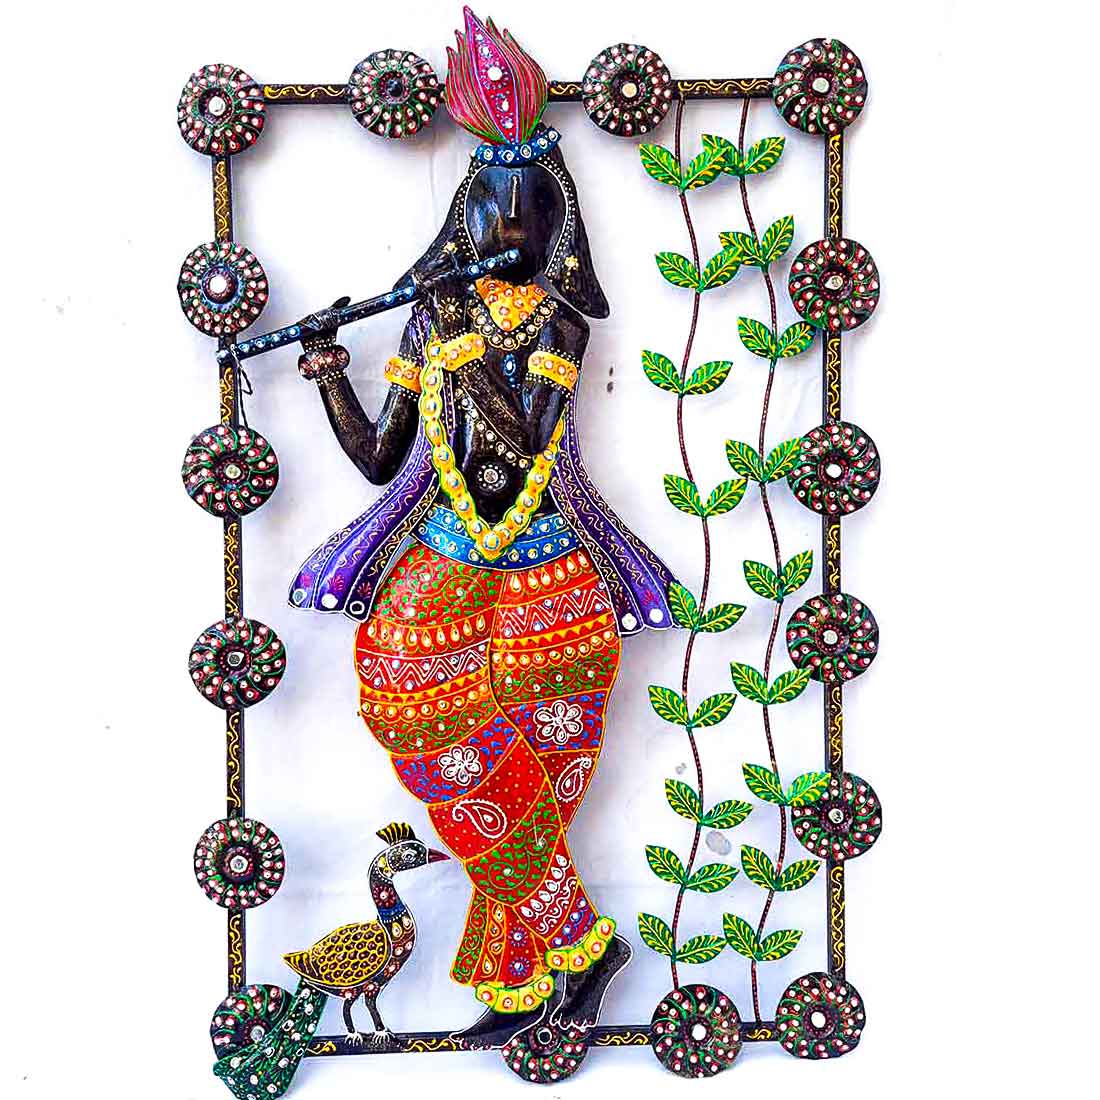 Wall Art Decor - Krishna Wall Hanging - For Home Decor & Gifts -  35 Inches - ApkaMart